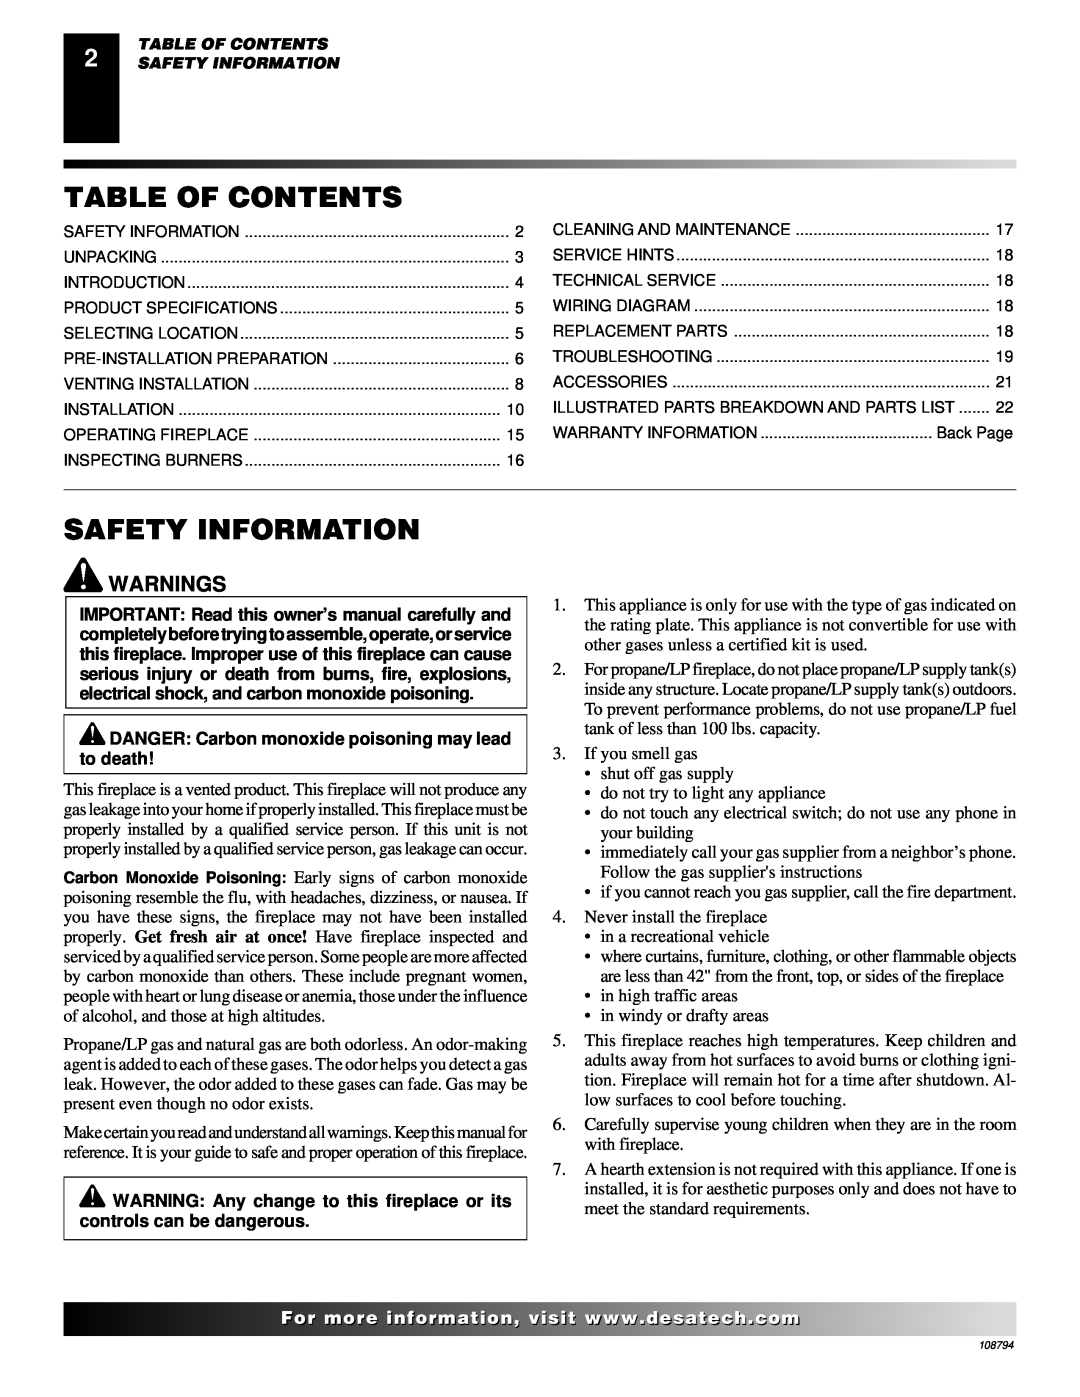 Desa P324E, VP324E, P325E, VP325E, P325E(B), VP325E(B) installation manual Table Of Contents, Safety Information, Warnings 